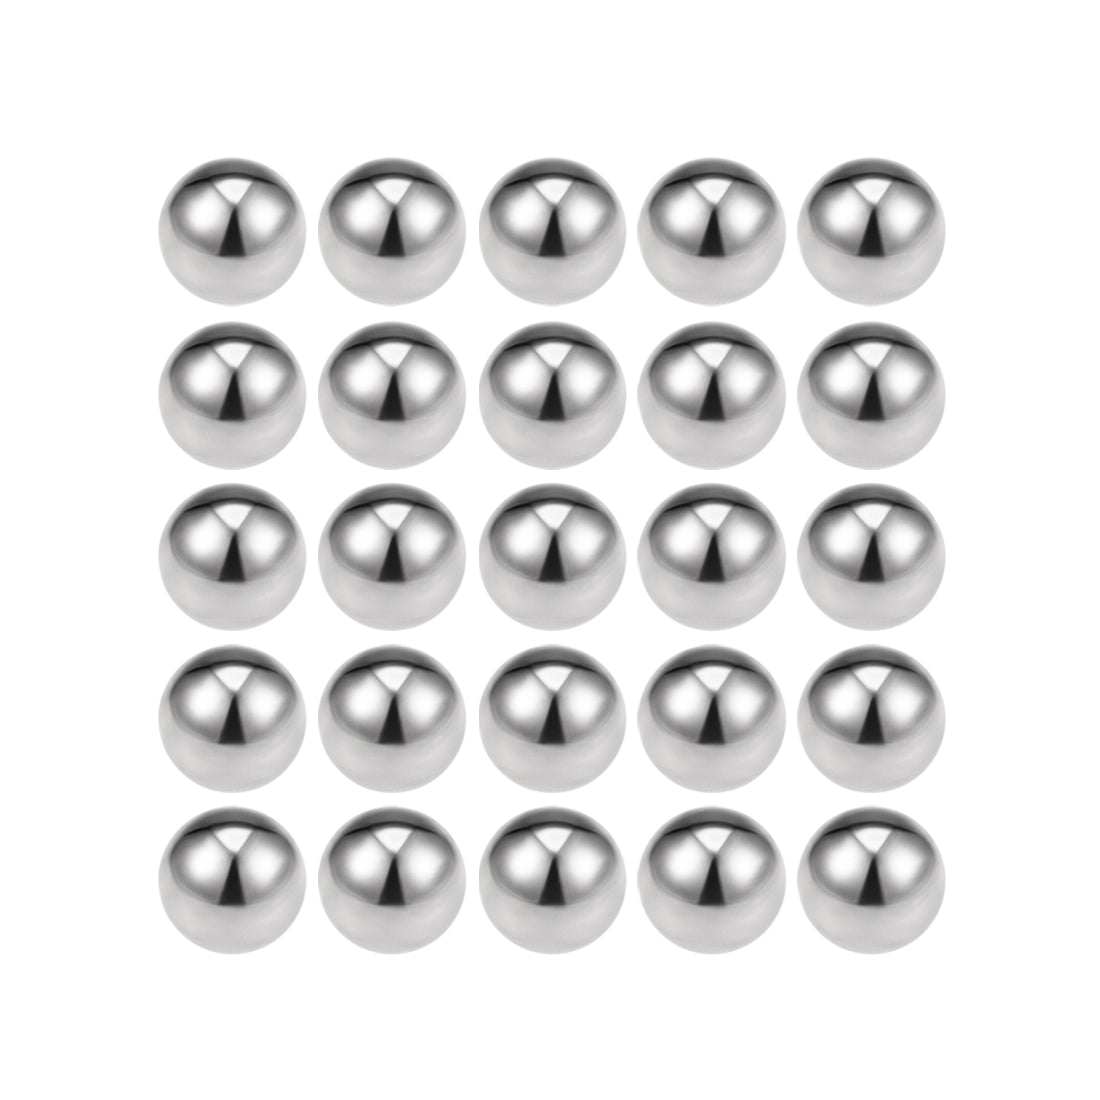 Uxcell Uxcell 1/4" Bearing Balls 304 Stainless Steel G100 Precision Balls 25pcs